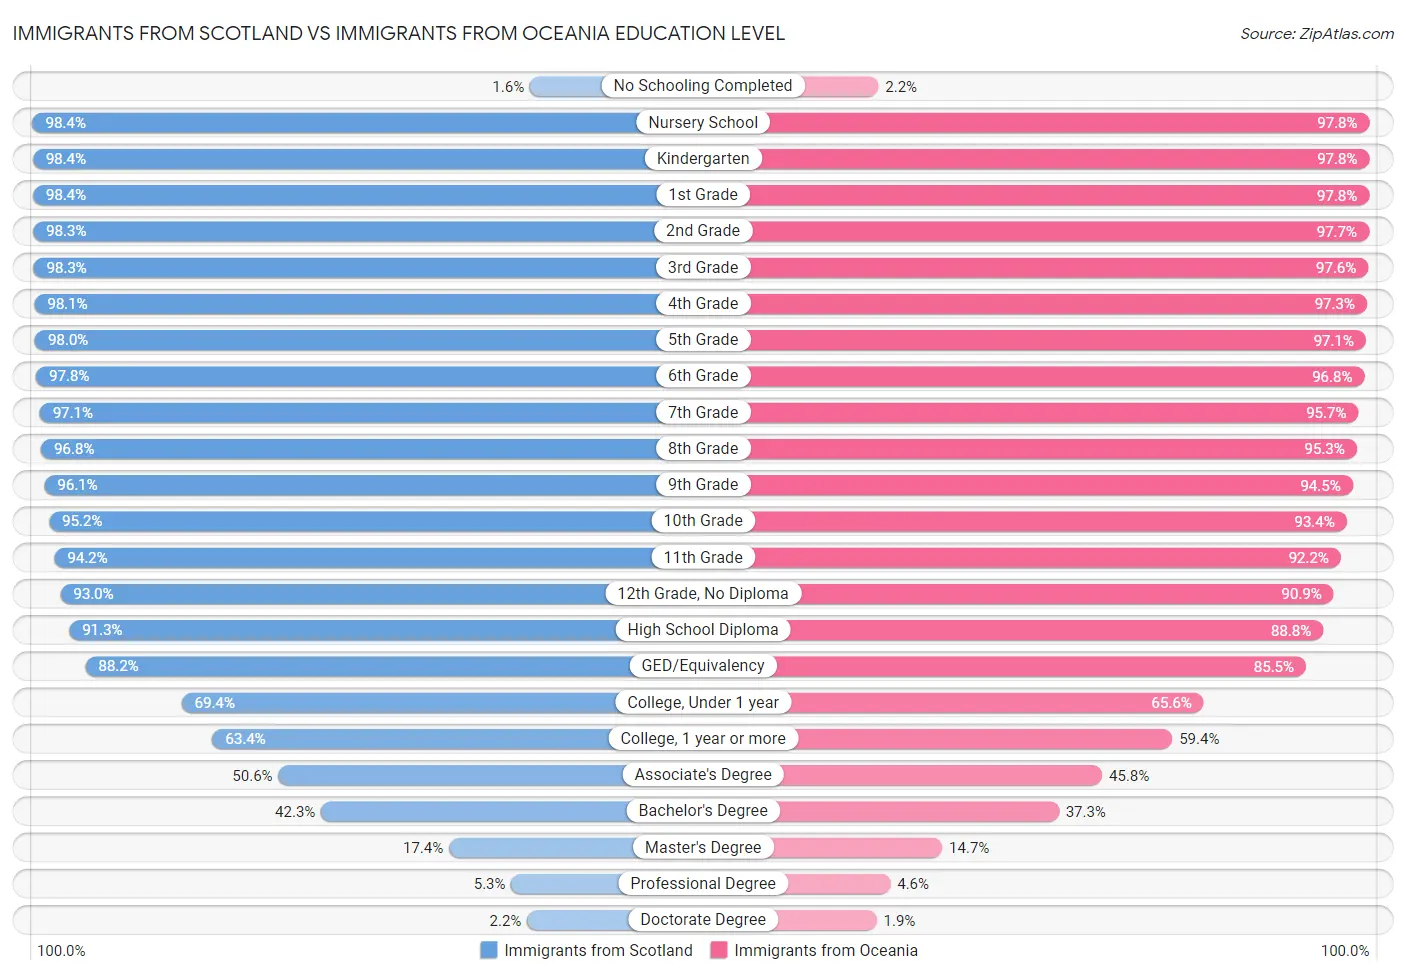 Immigrants from Scotland vs Immigrants from Oceania Education Level